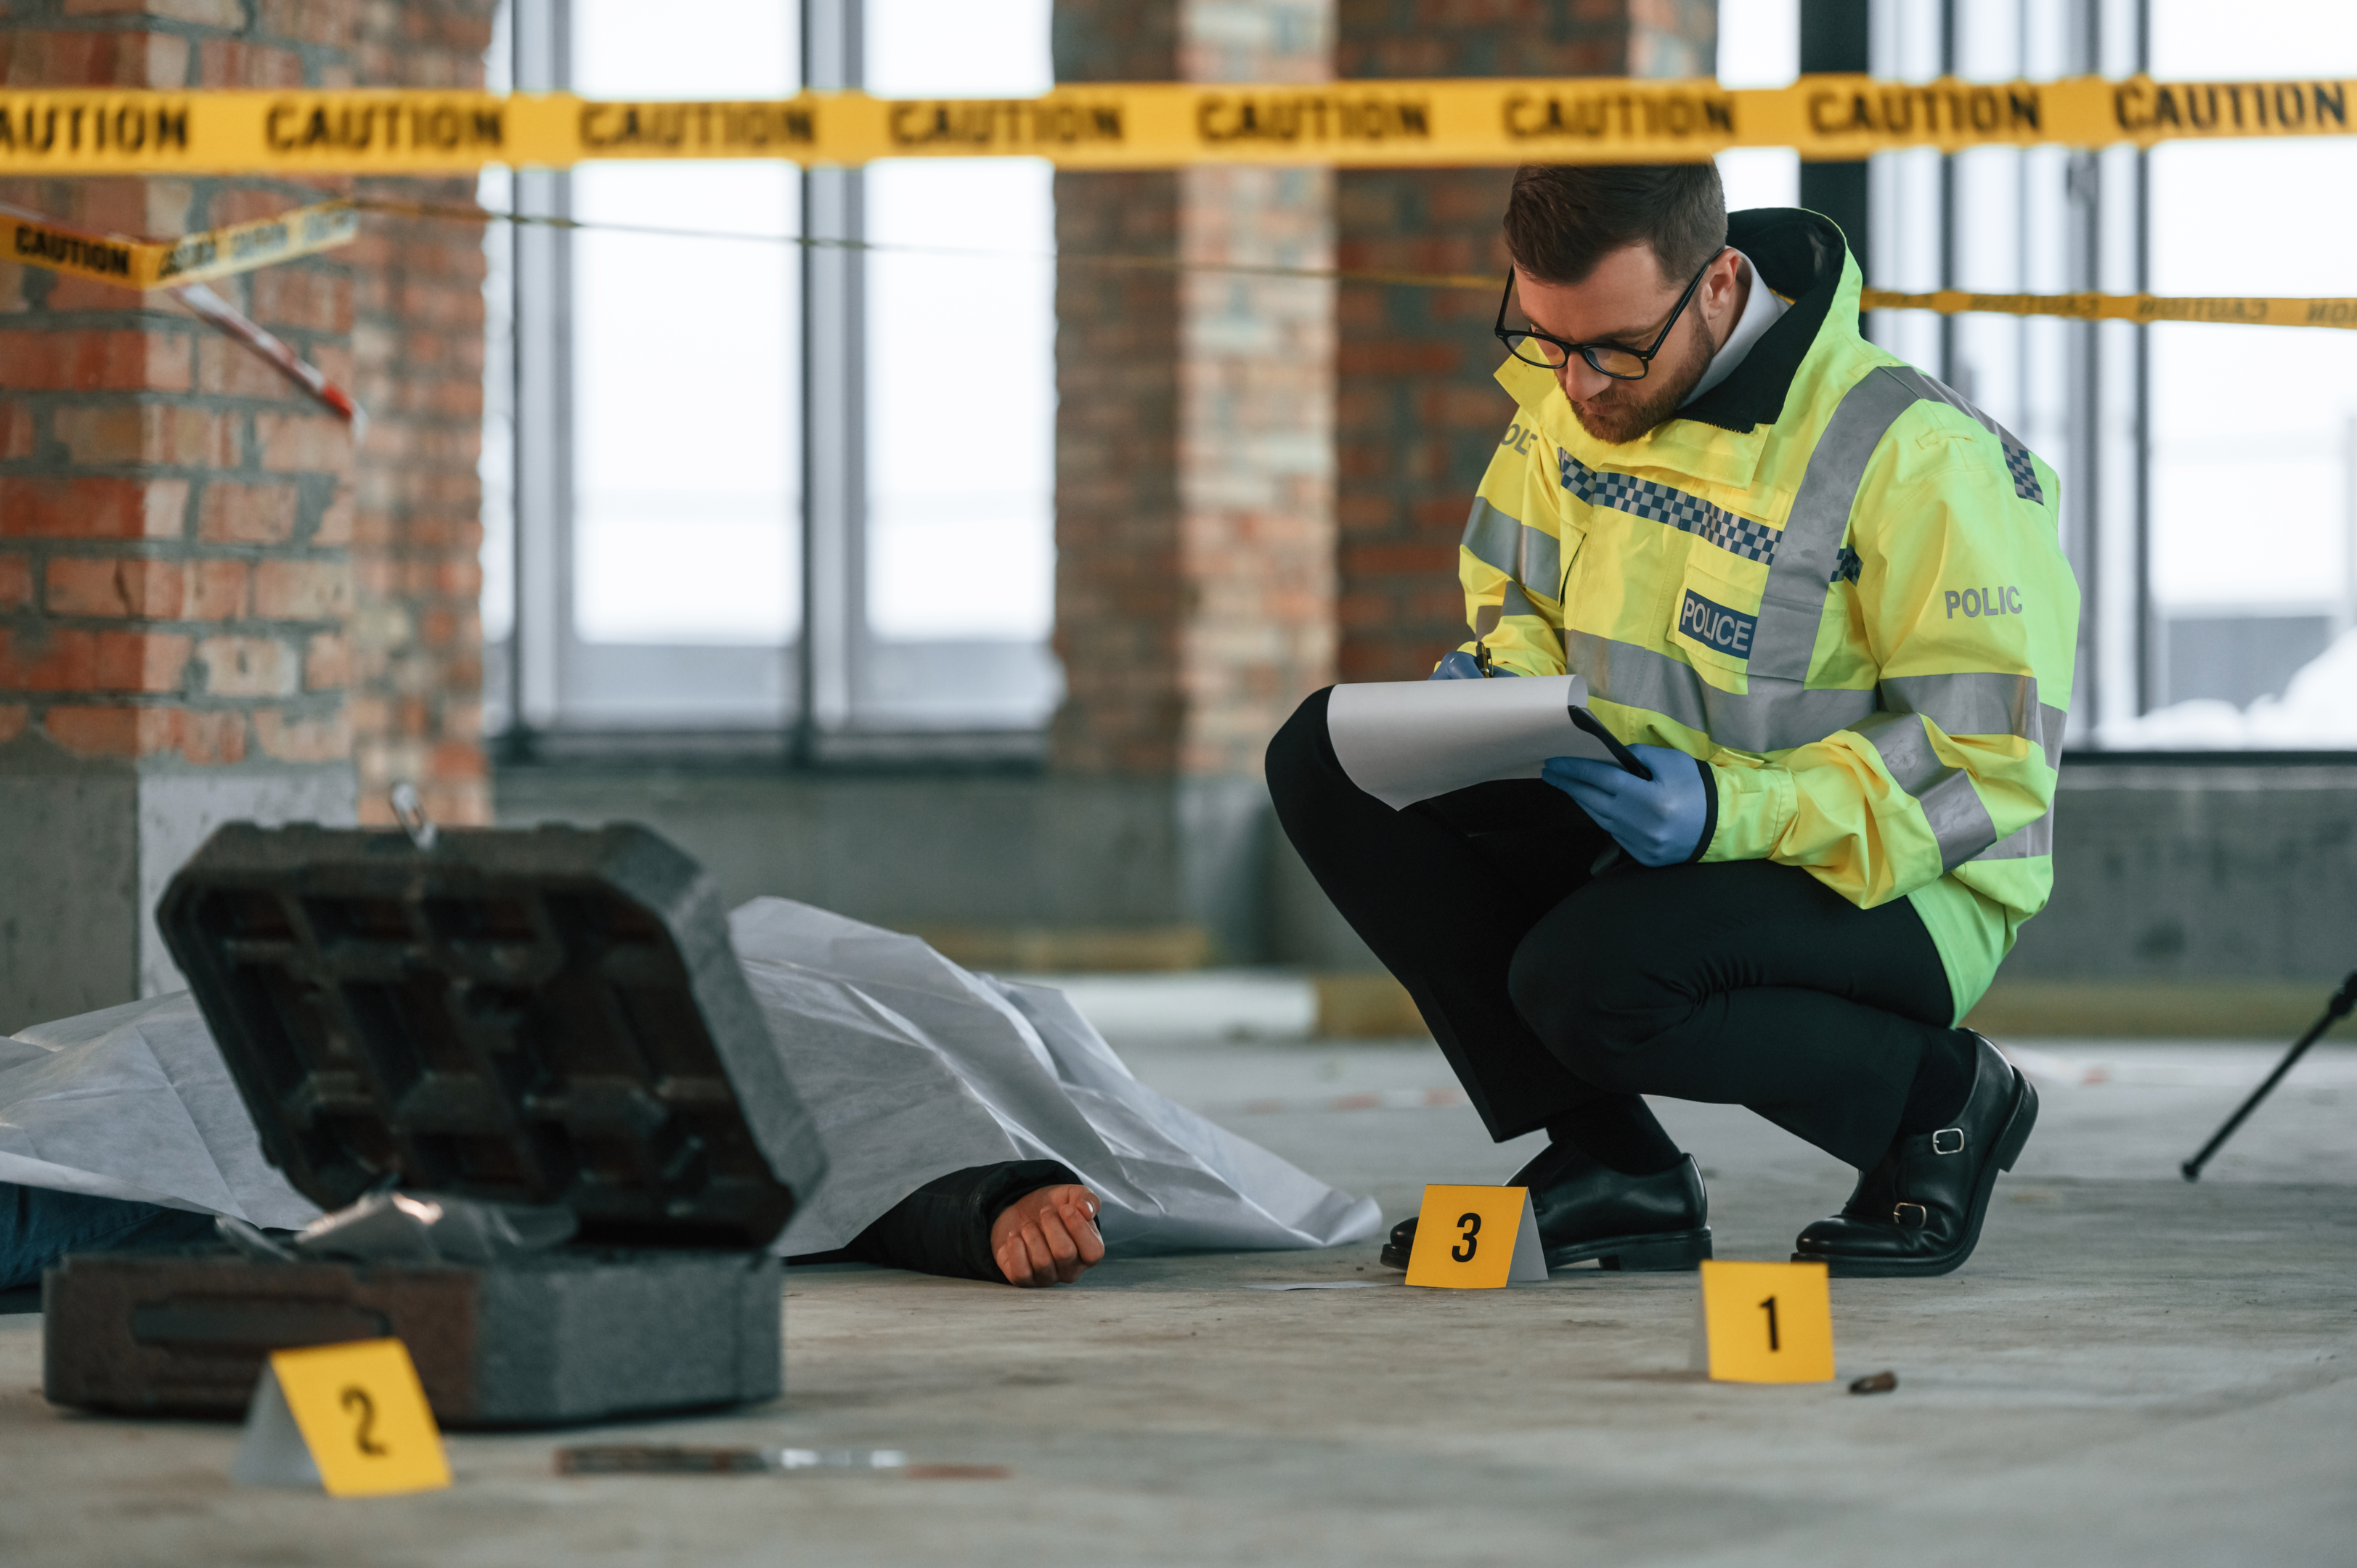 Personal Injuries in Construction